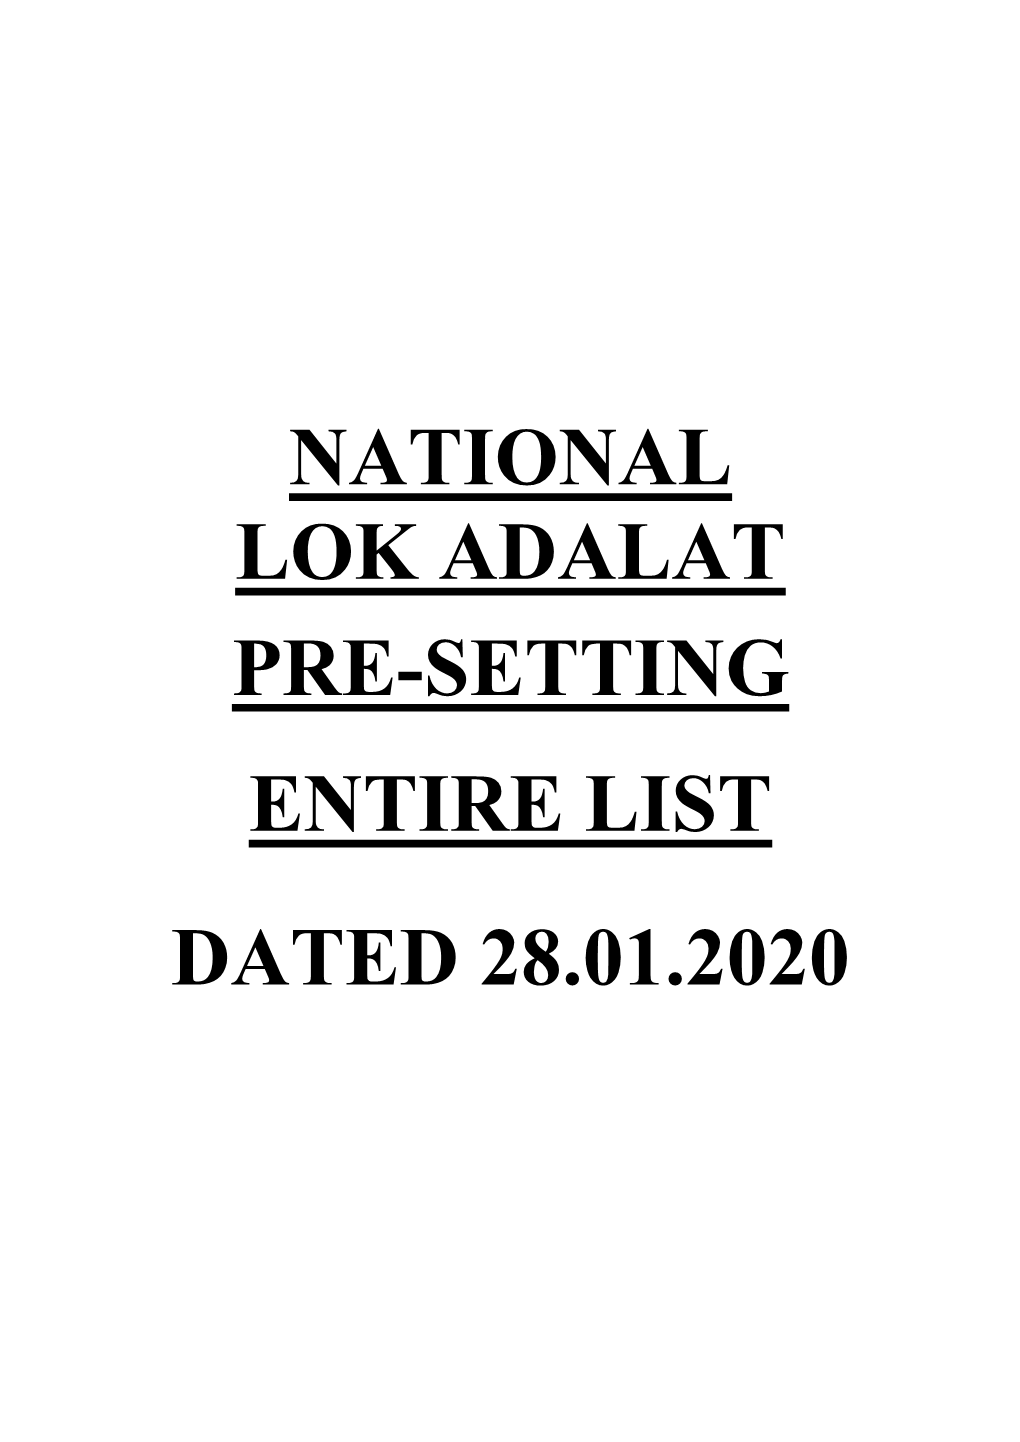 National Lok Adalat Pre-Setting Entire List Dated 28.01.2020 High Court of Andhra Pradesh Court No